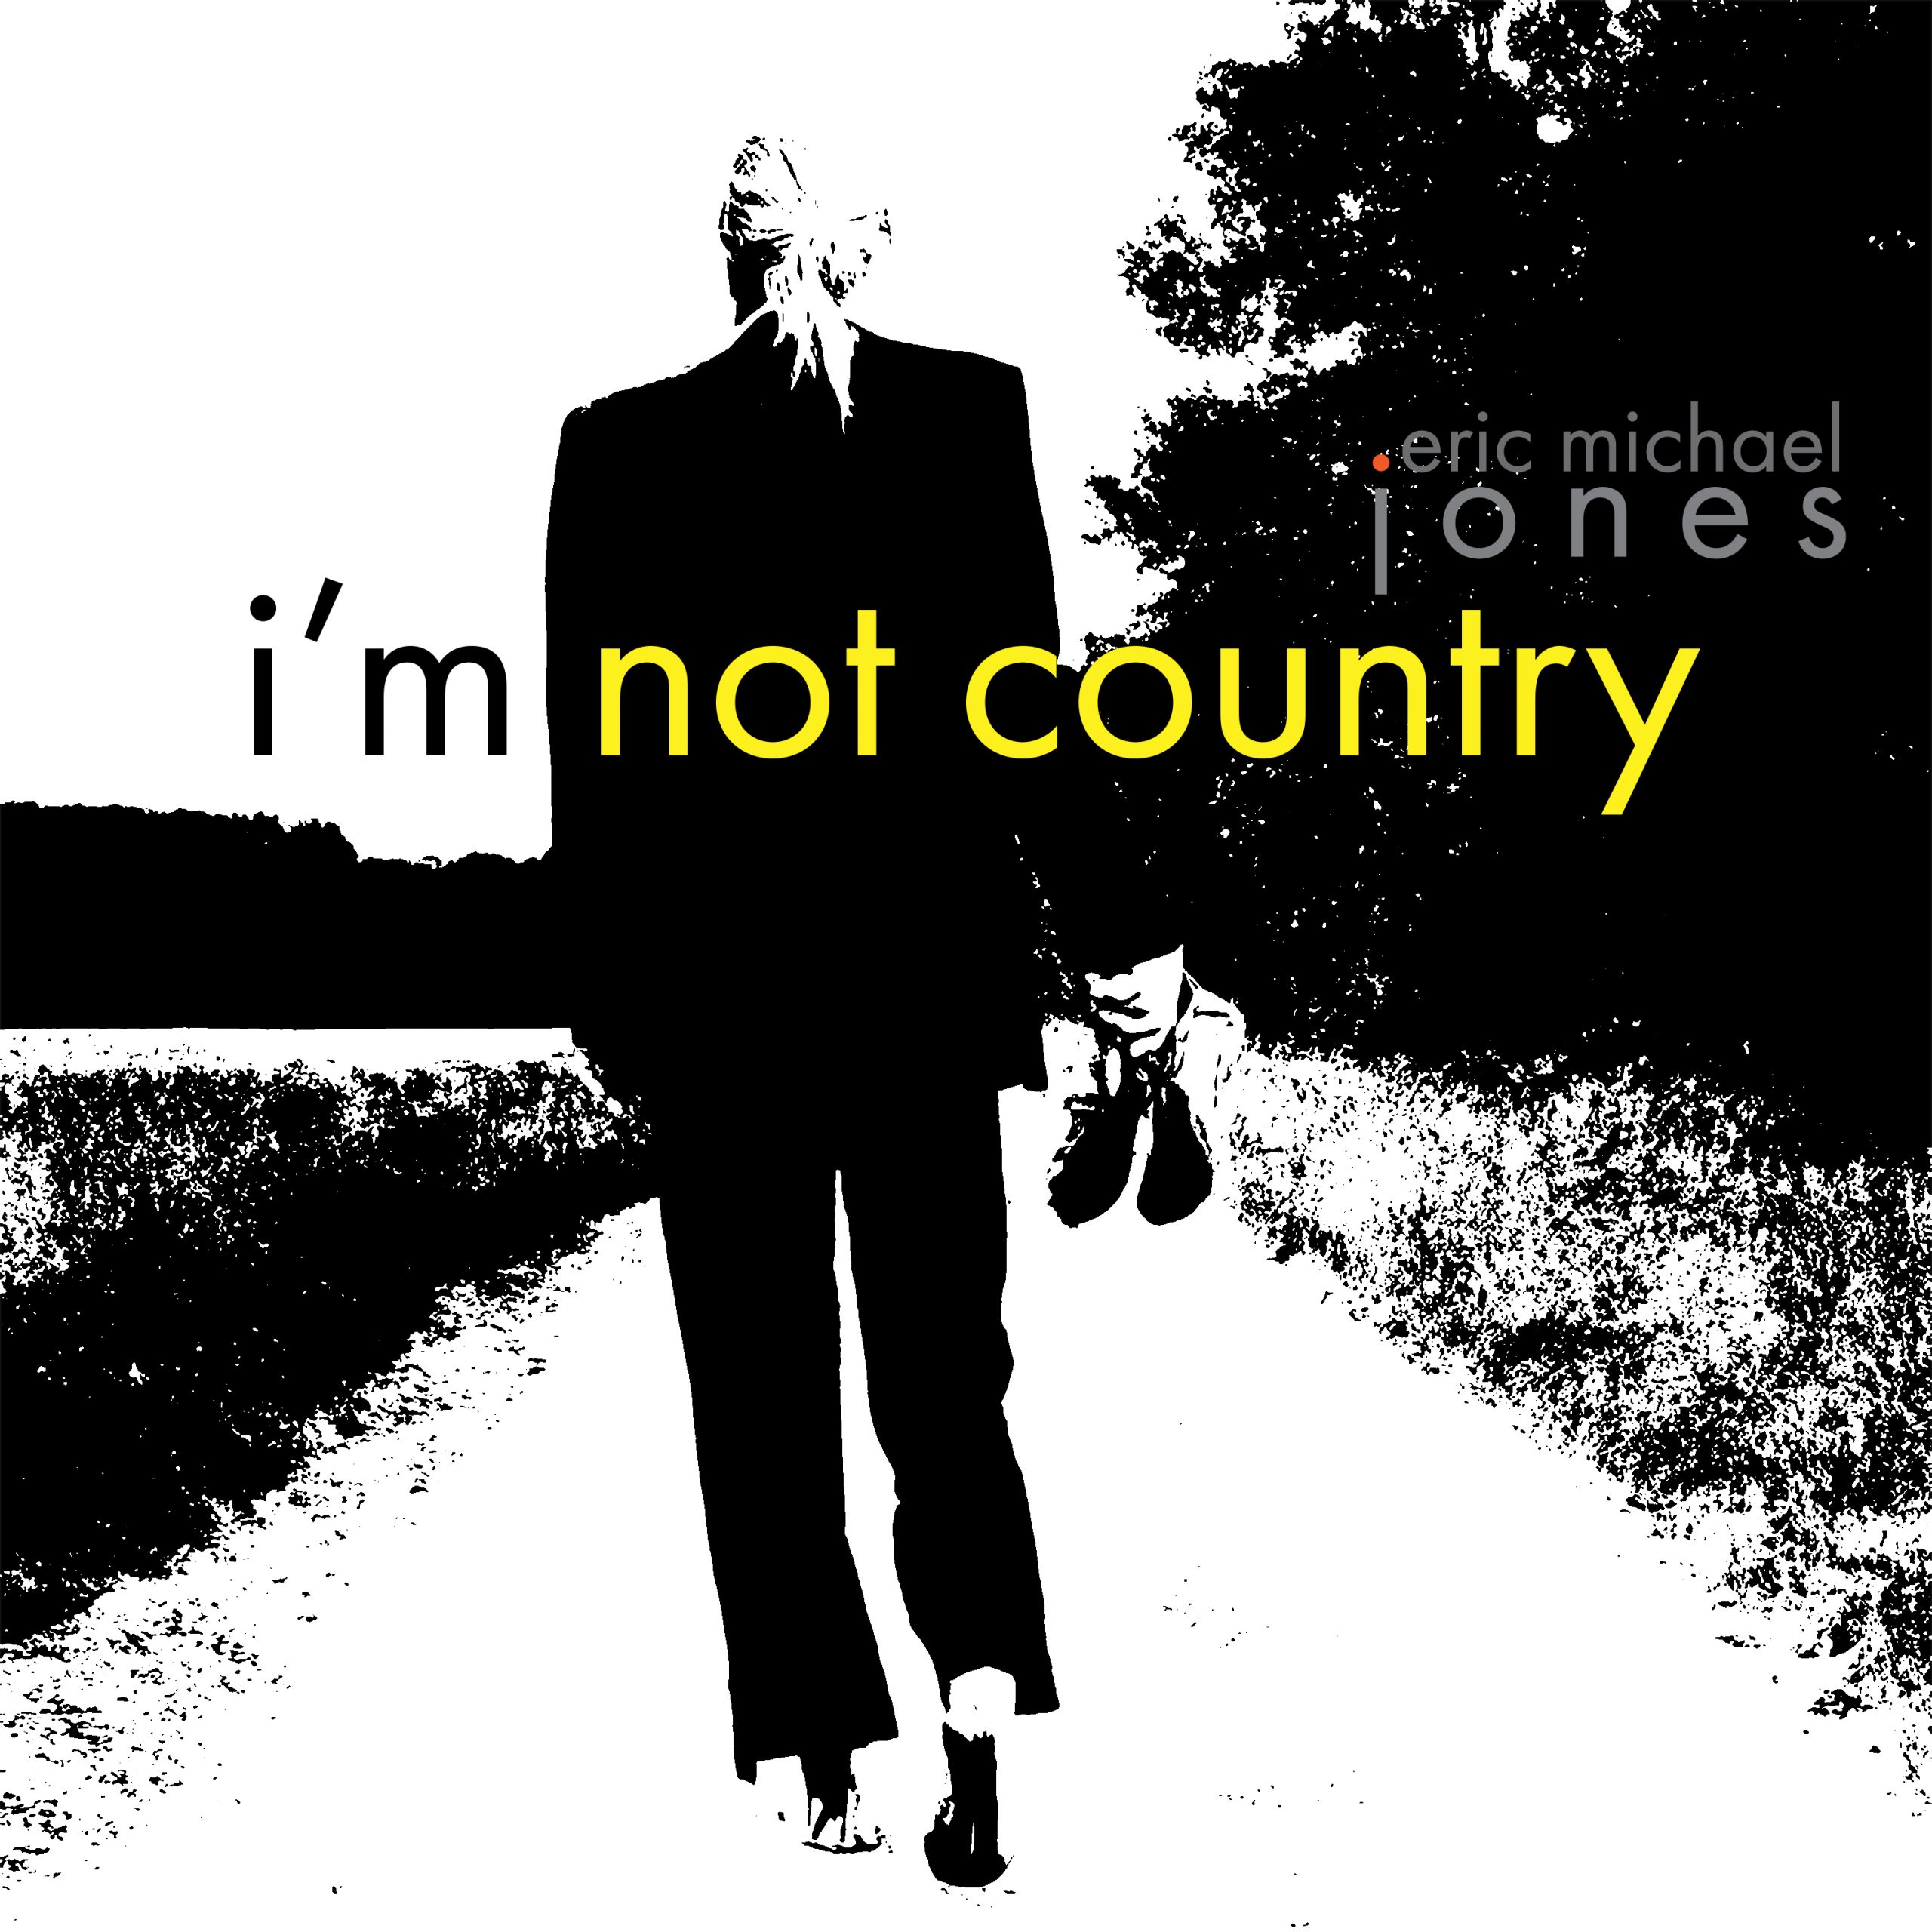 I'm not country album cover